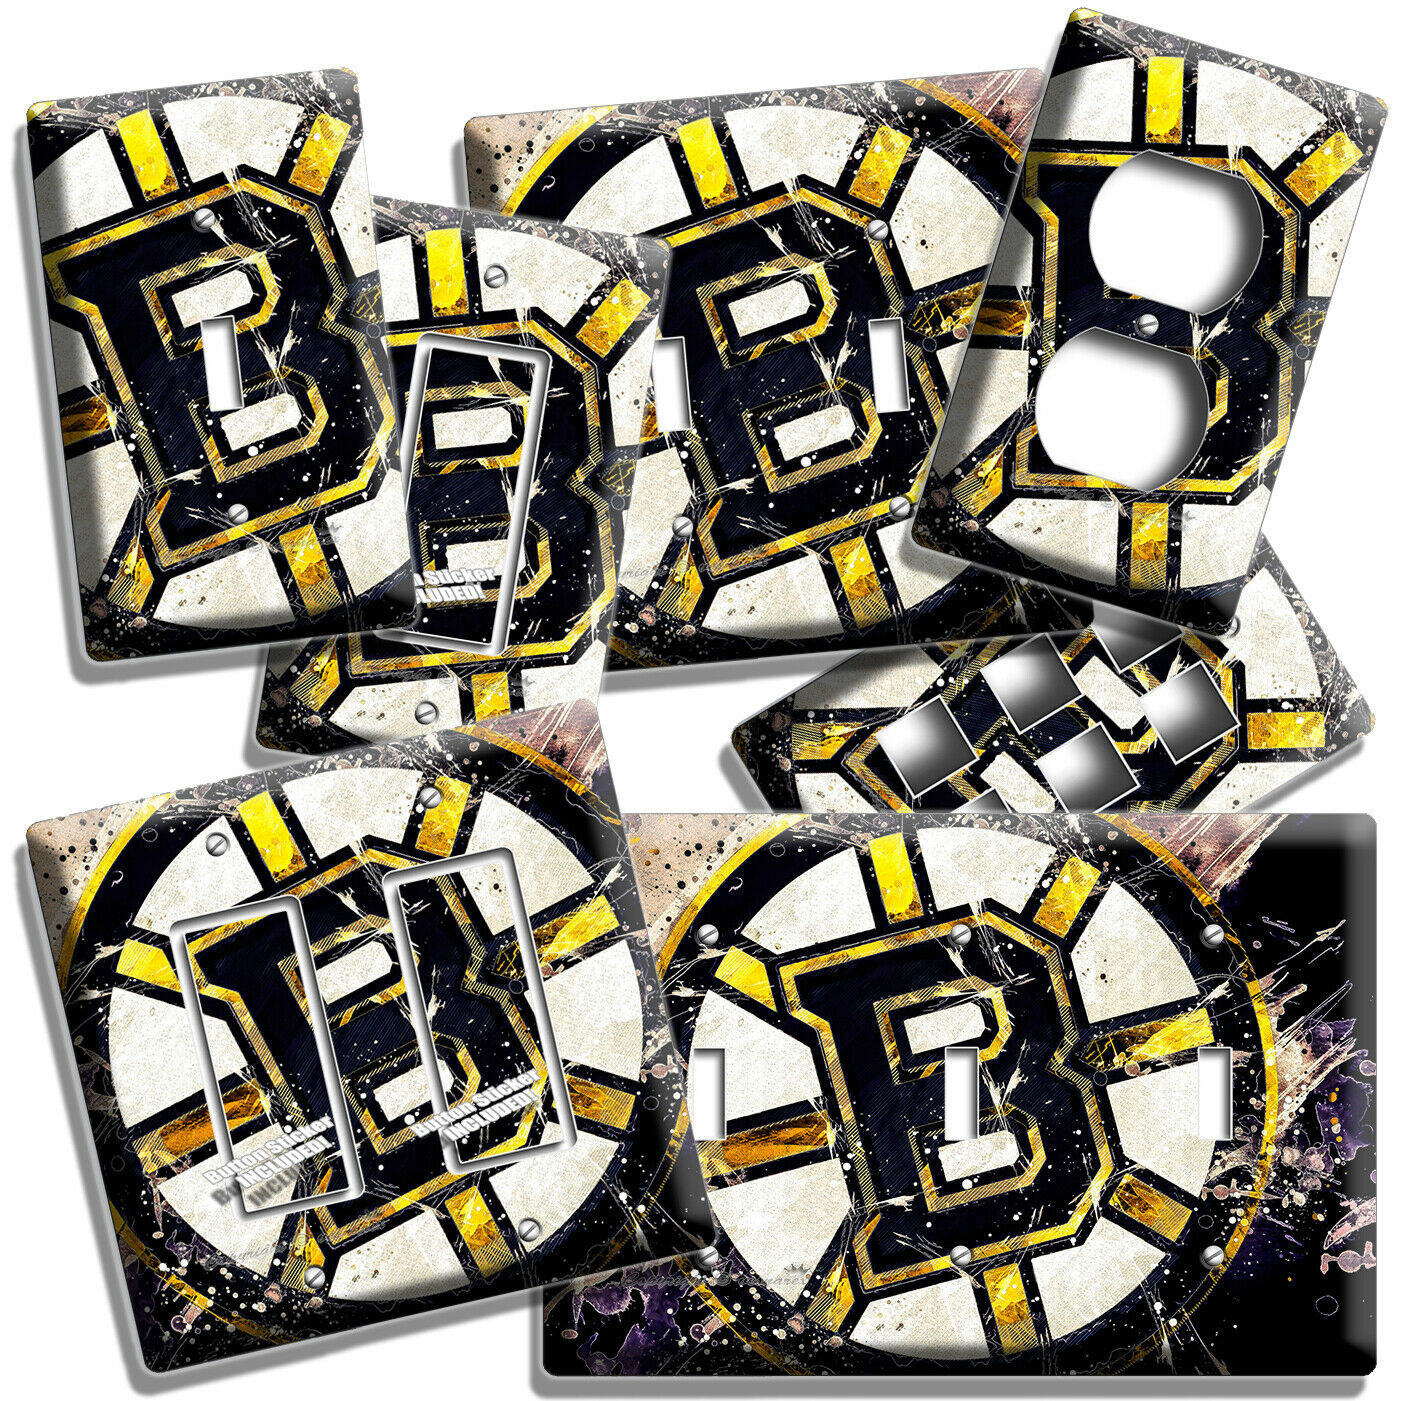 Primary image for RUSTIC BOSTON BRUINS HOCKEY TEAM LOGO LIGHT SWITCH OUTLET WALL PLATES ROOM DECOR